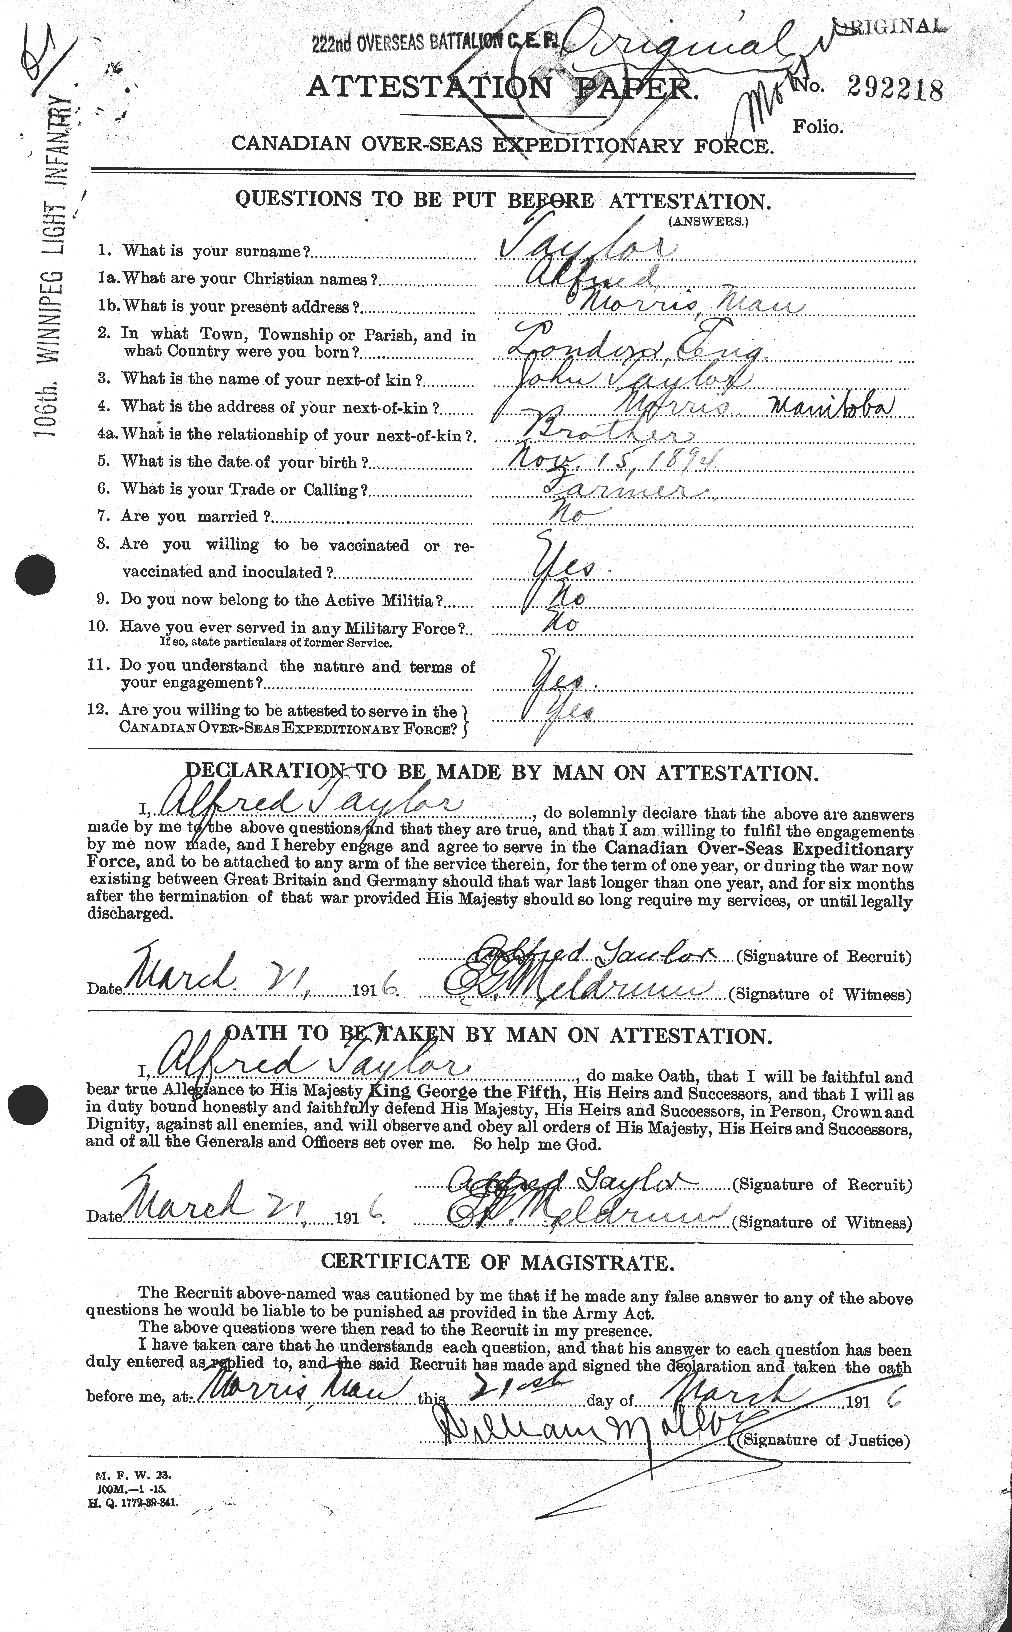 Personnel Records of the First World War - CEF 626168a